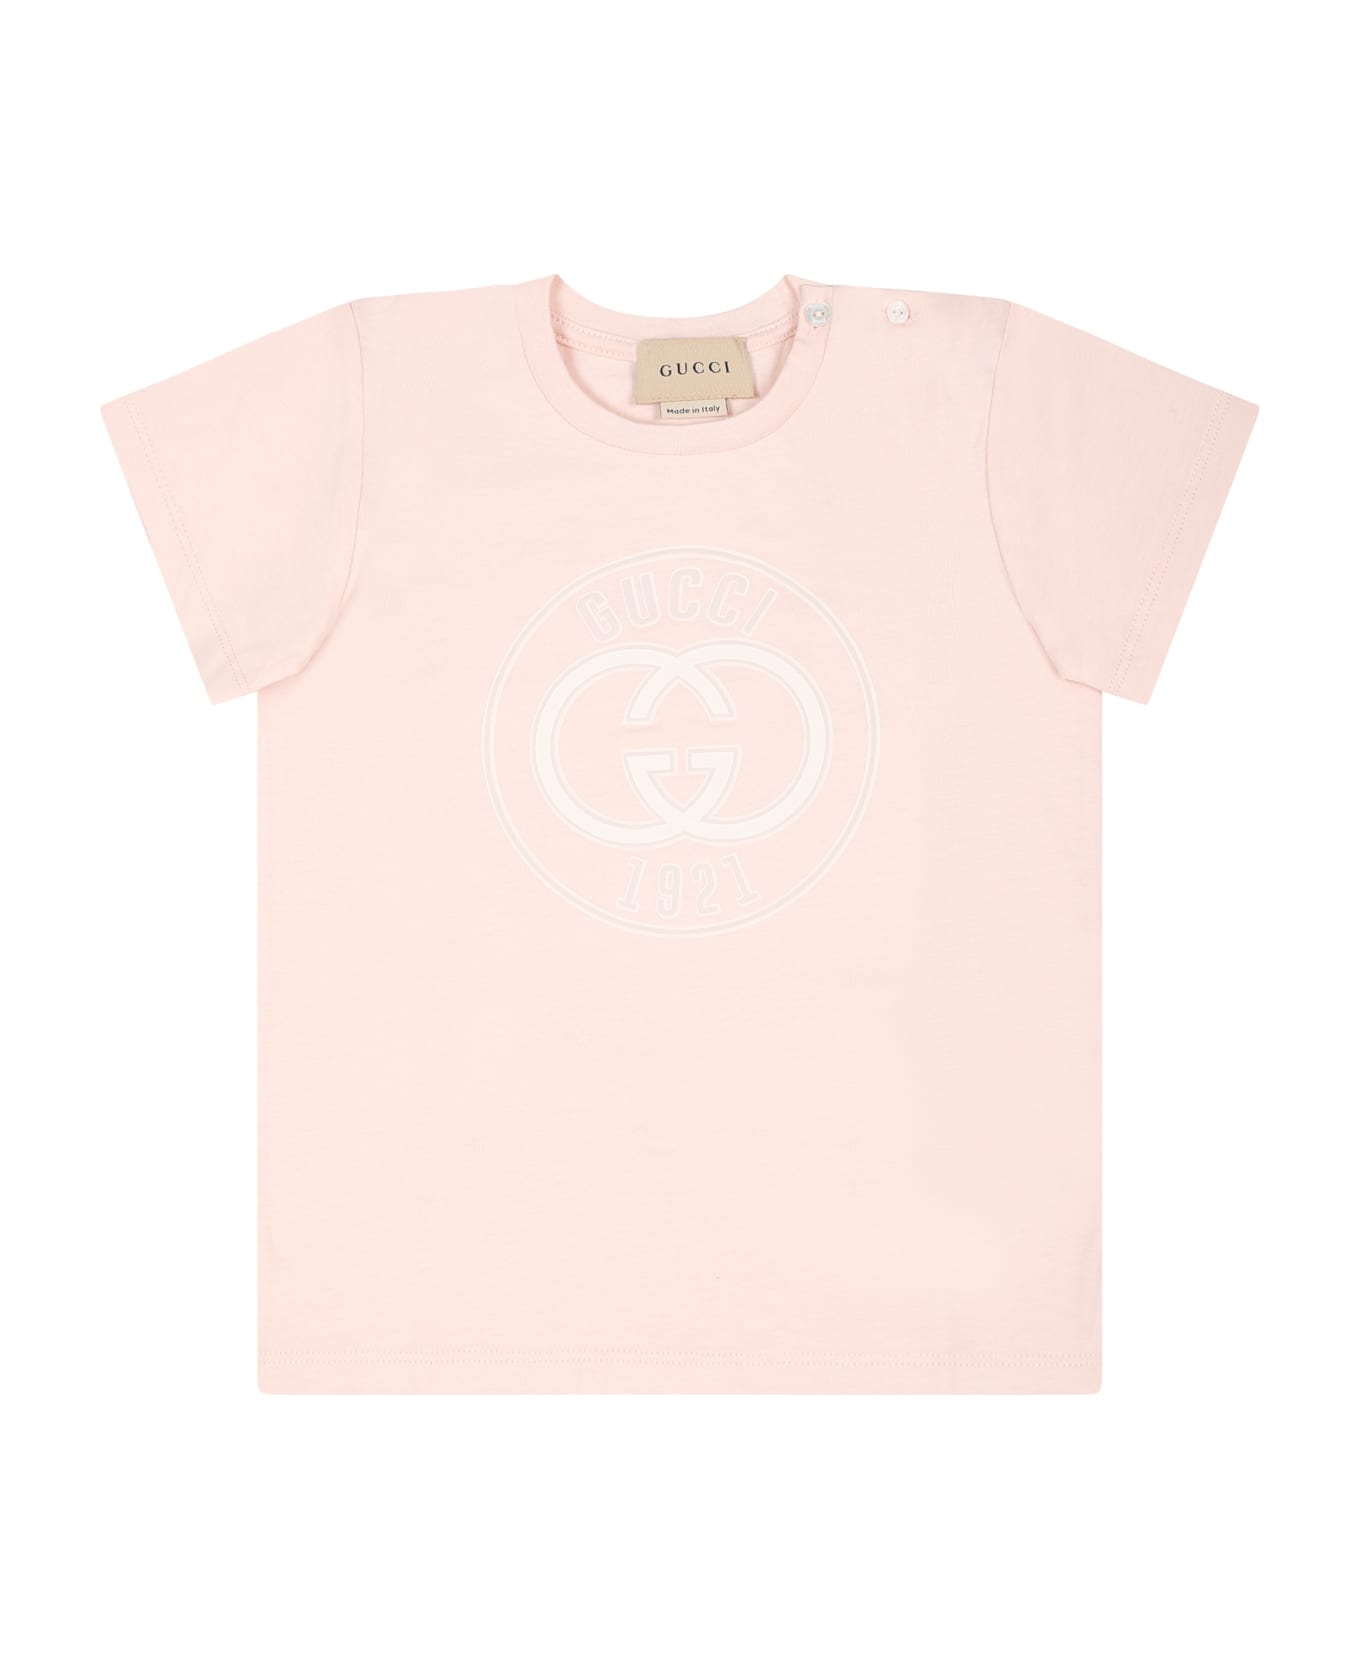 Gucci Pink T-shirt For Baby Girl With Logo Gucci 1921 - Pink